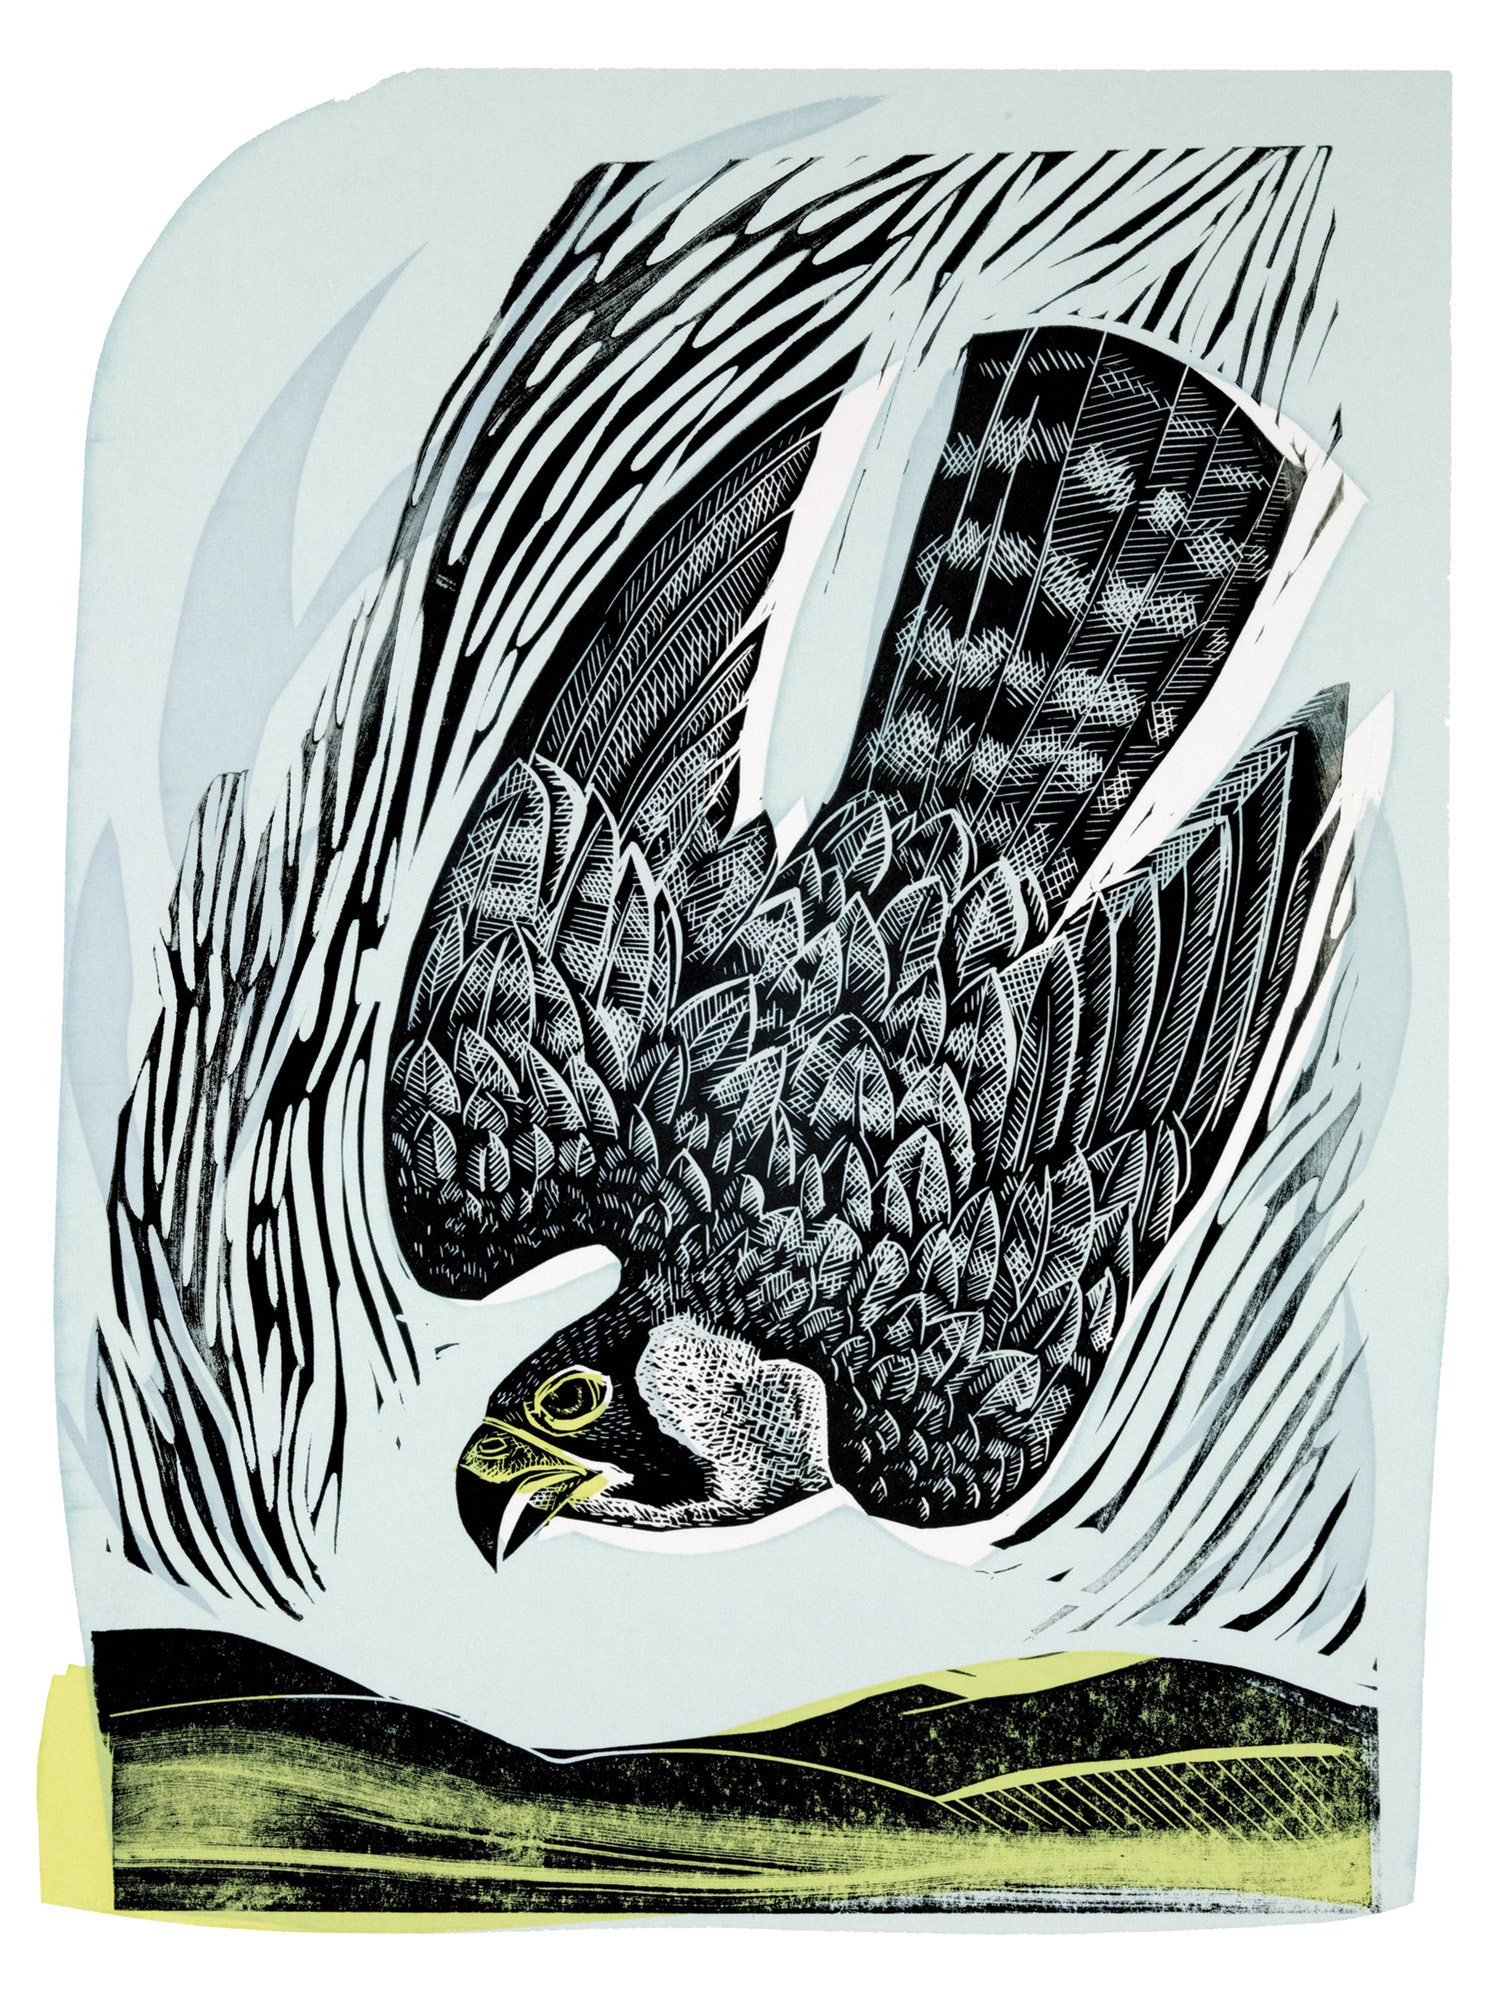 Diving Falcon by Angela Harding